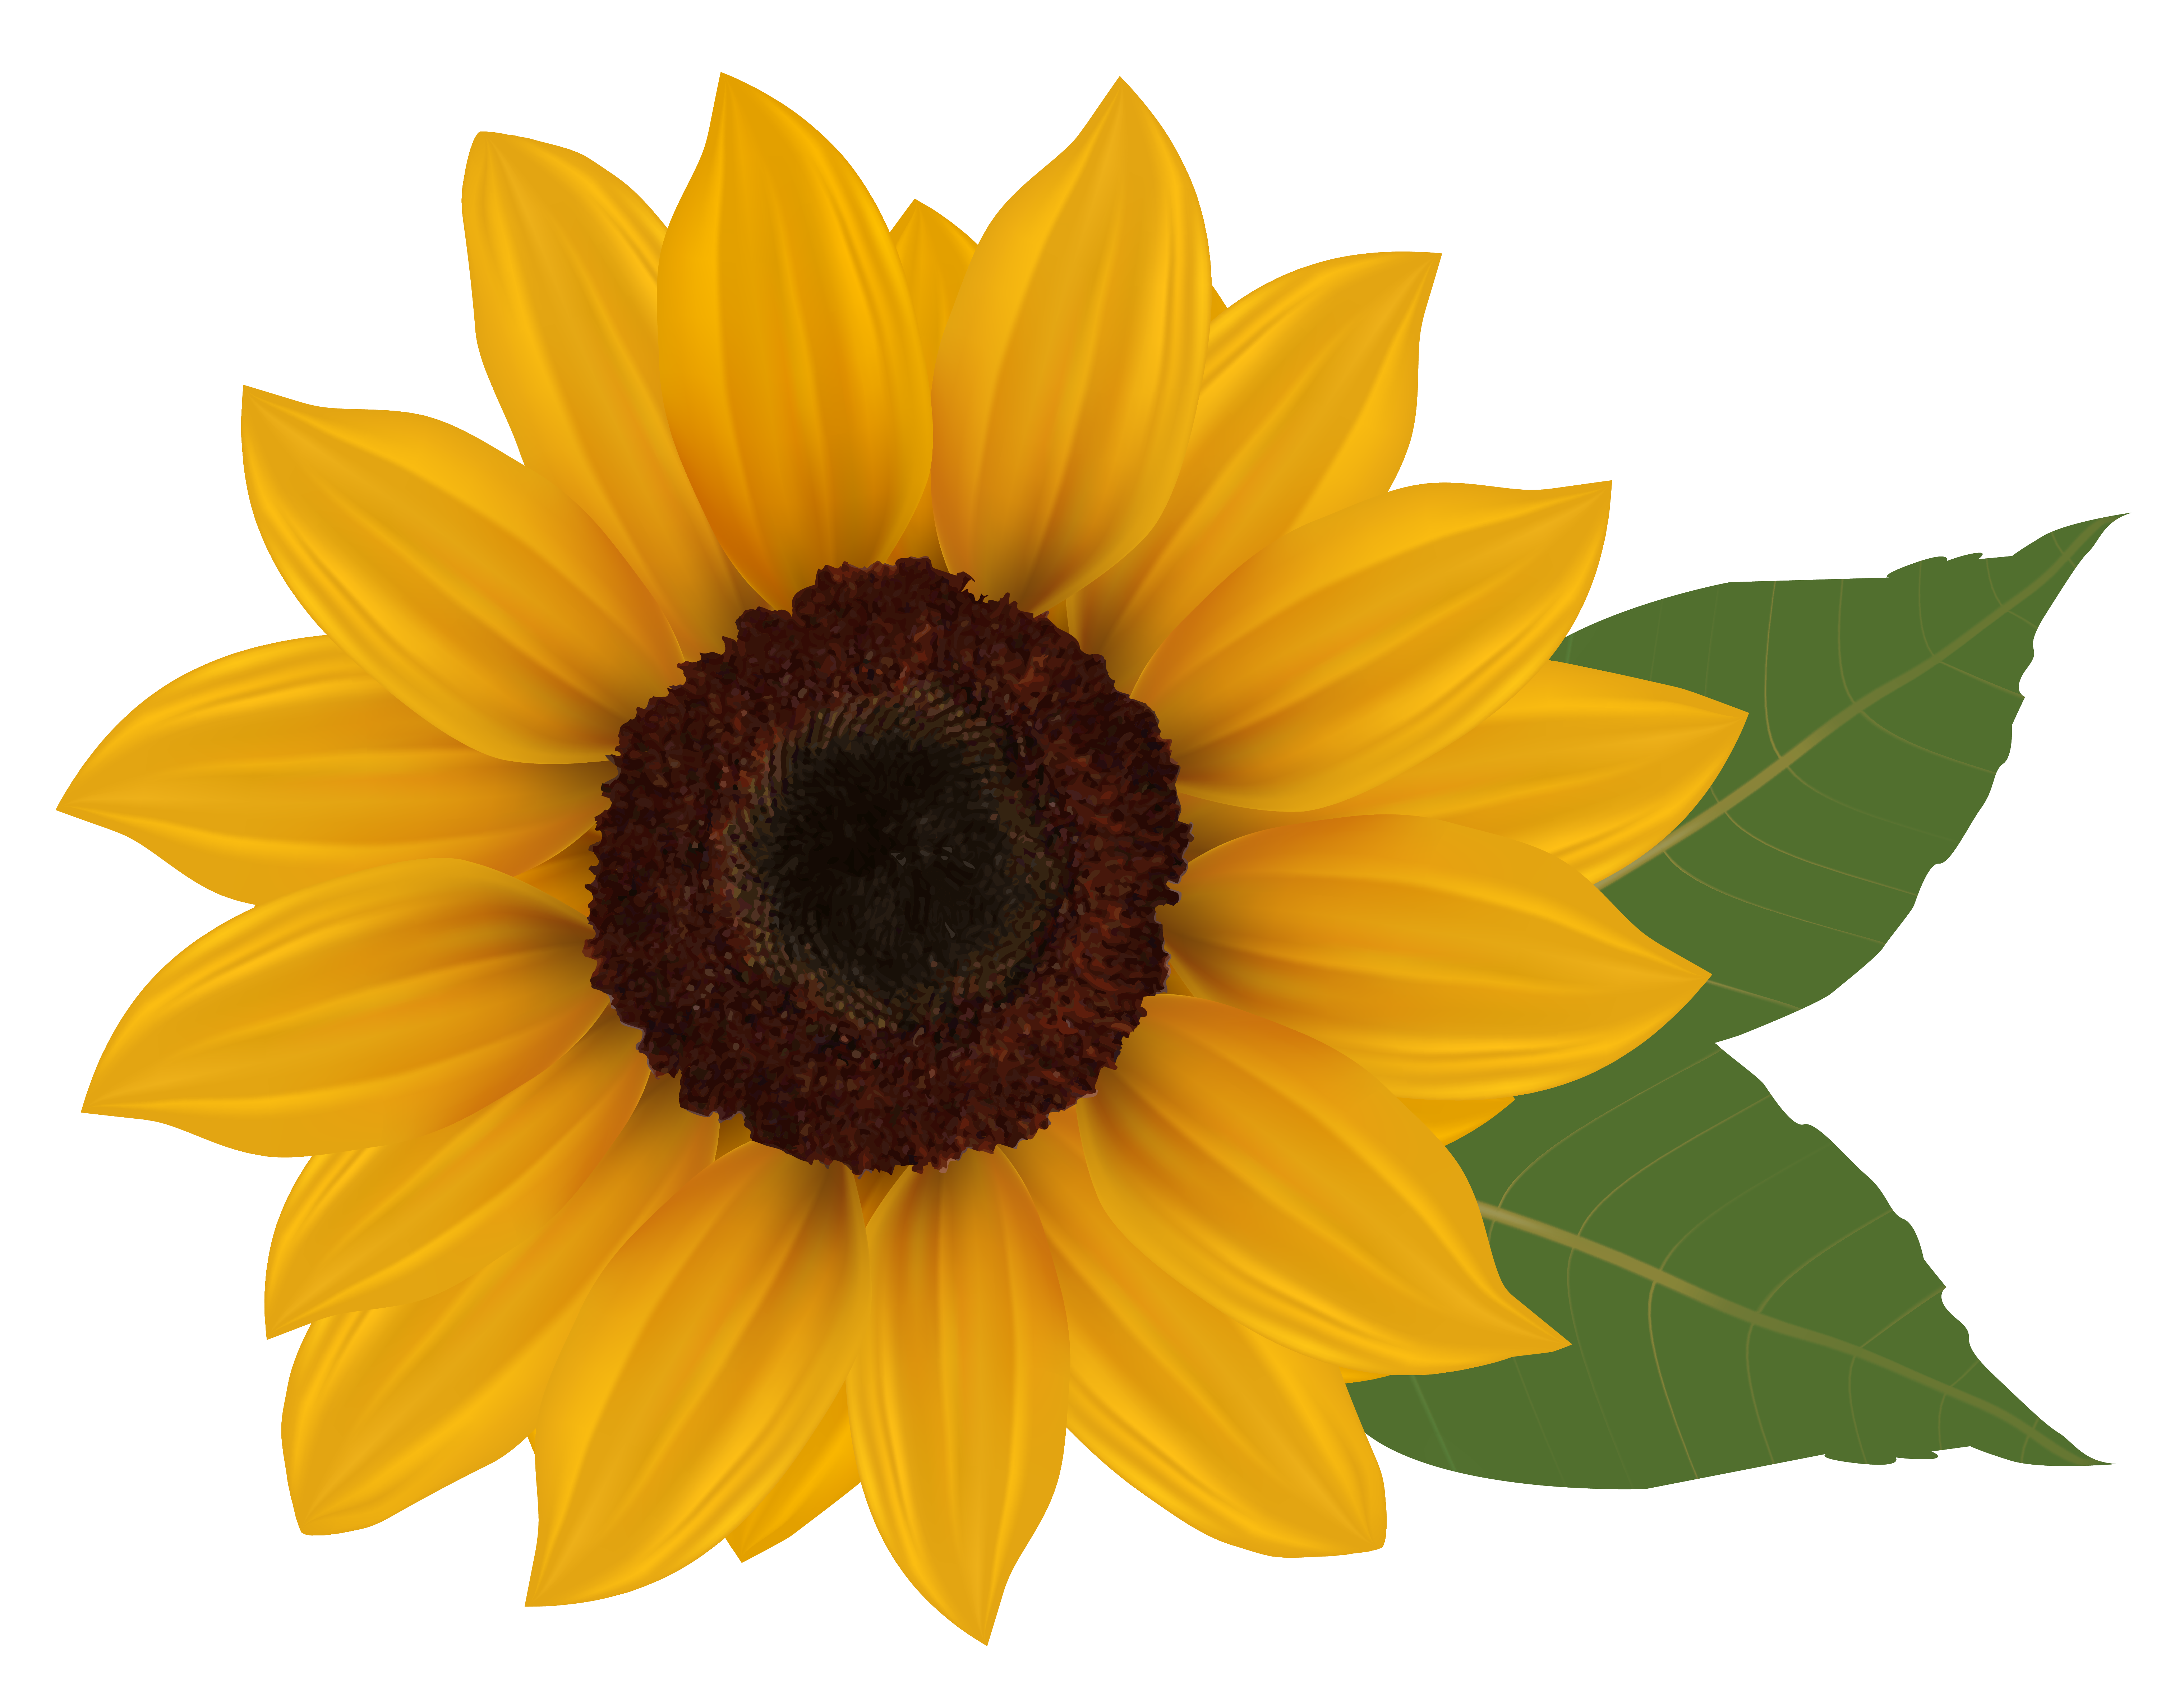 Free: Sunflower Flower, PNG transparent background - nohat.cc